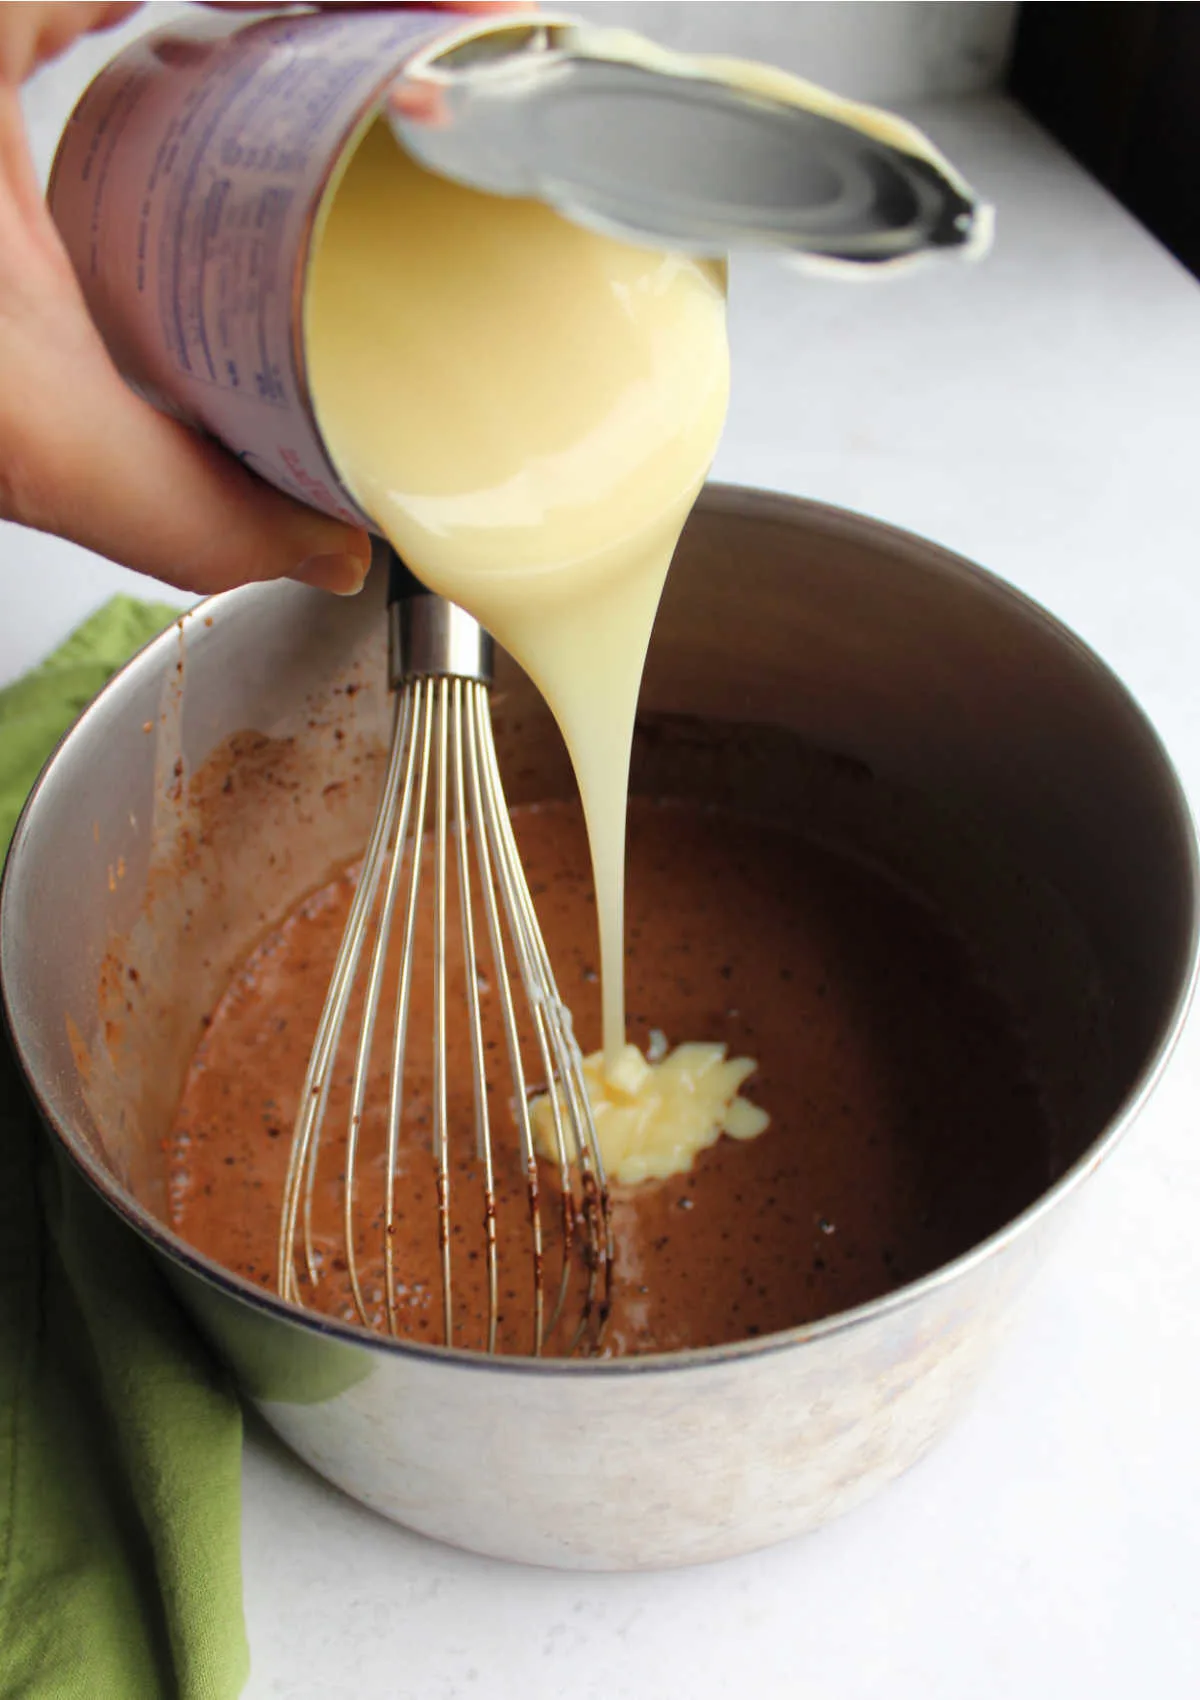 Pouring can of condensed milk into chocolate pudding pie filling mixture.